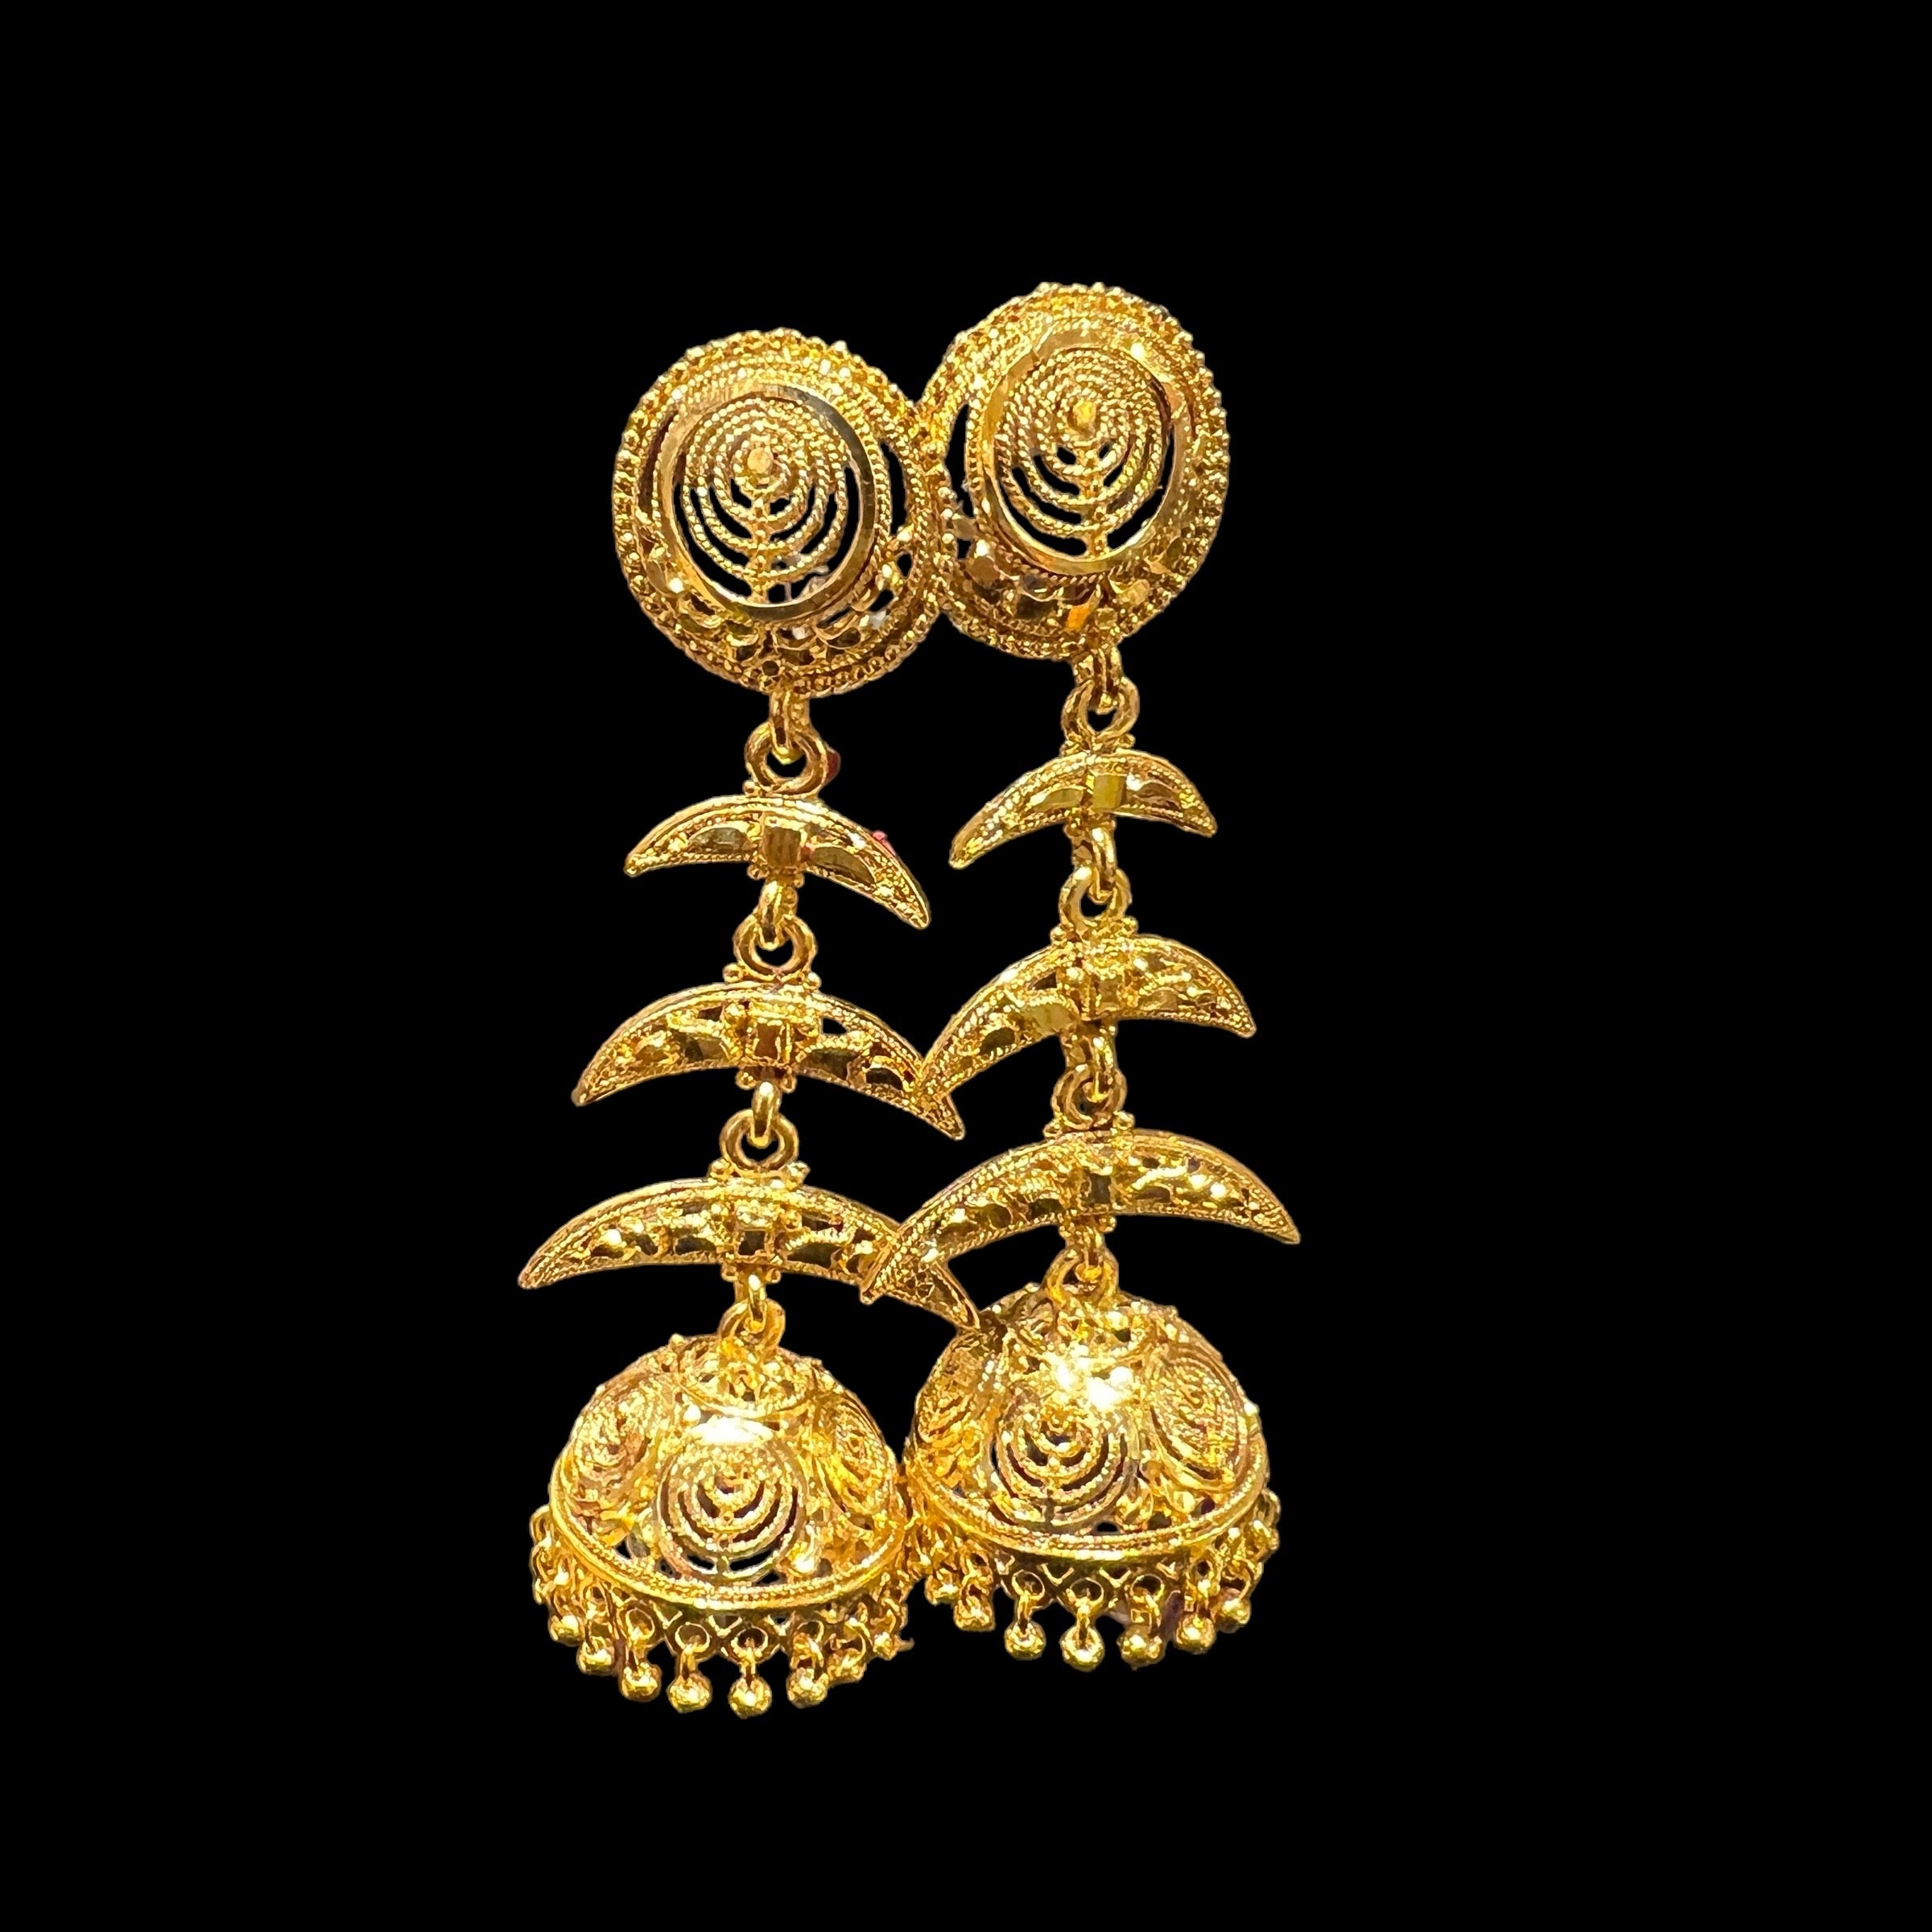 3 Tier Chand Jhumka Gold Earrings - Vintage India NYC